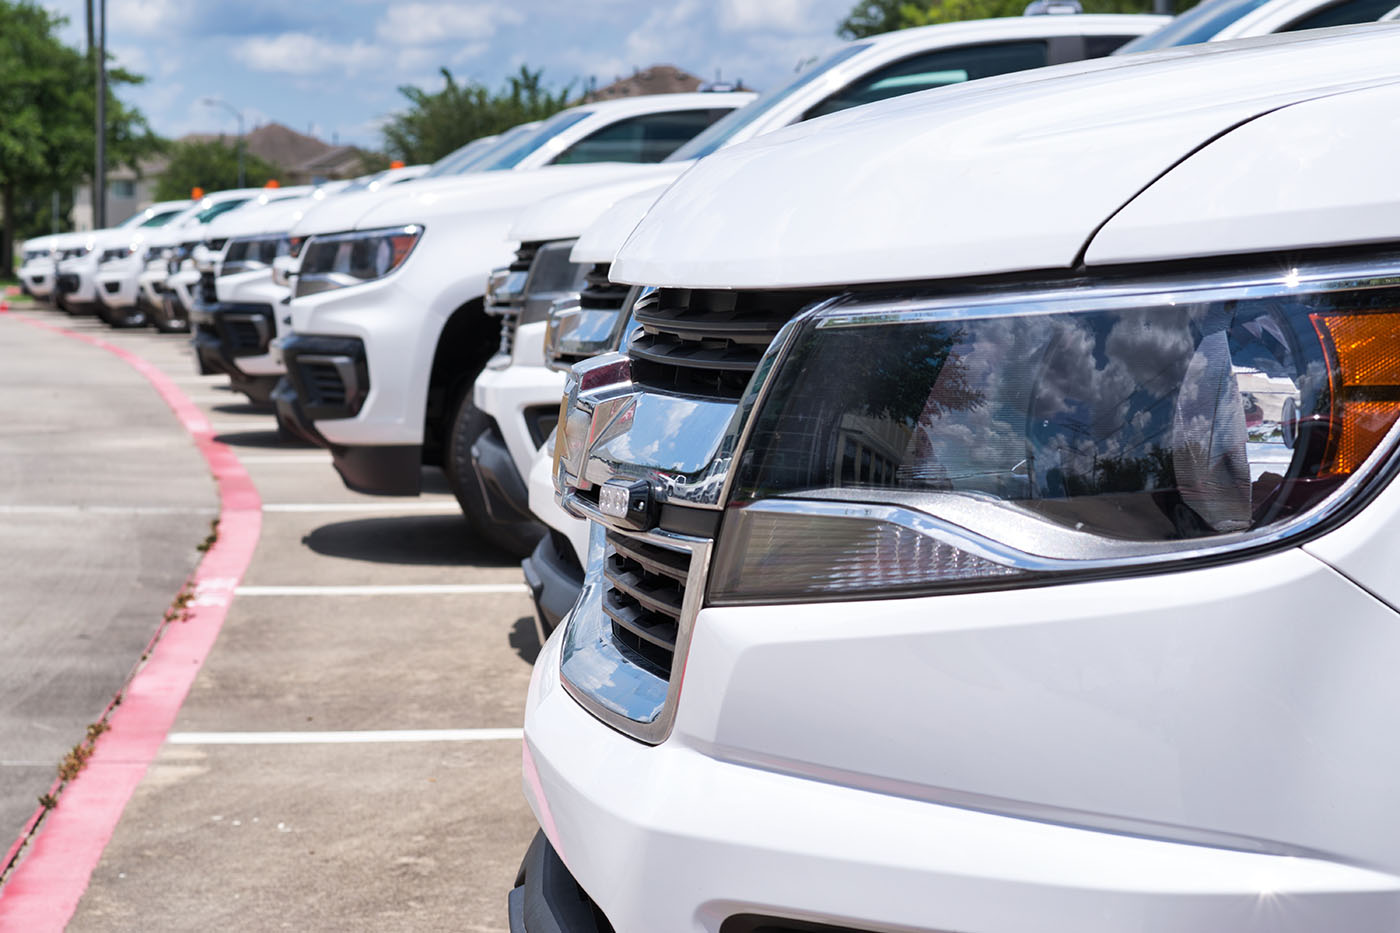 A line of white car rentals, check out Dapper Pros's mobile detailing fleet services.